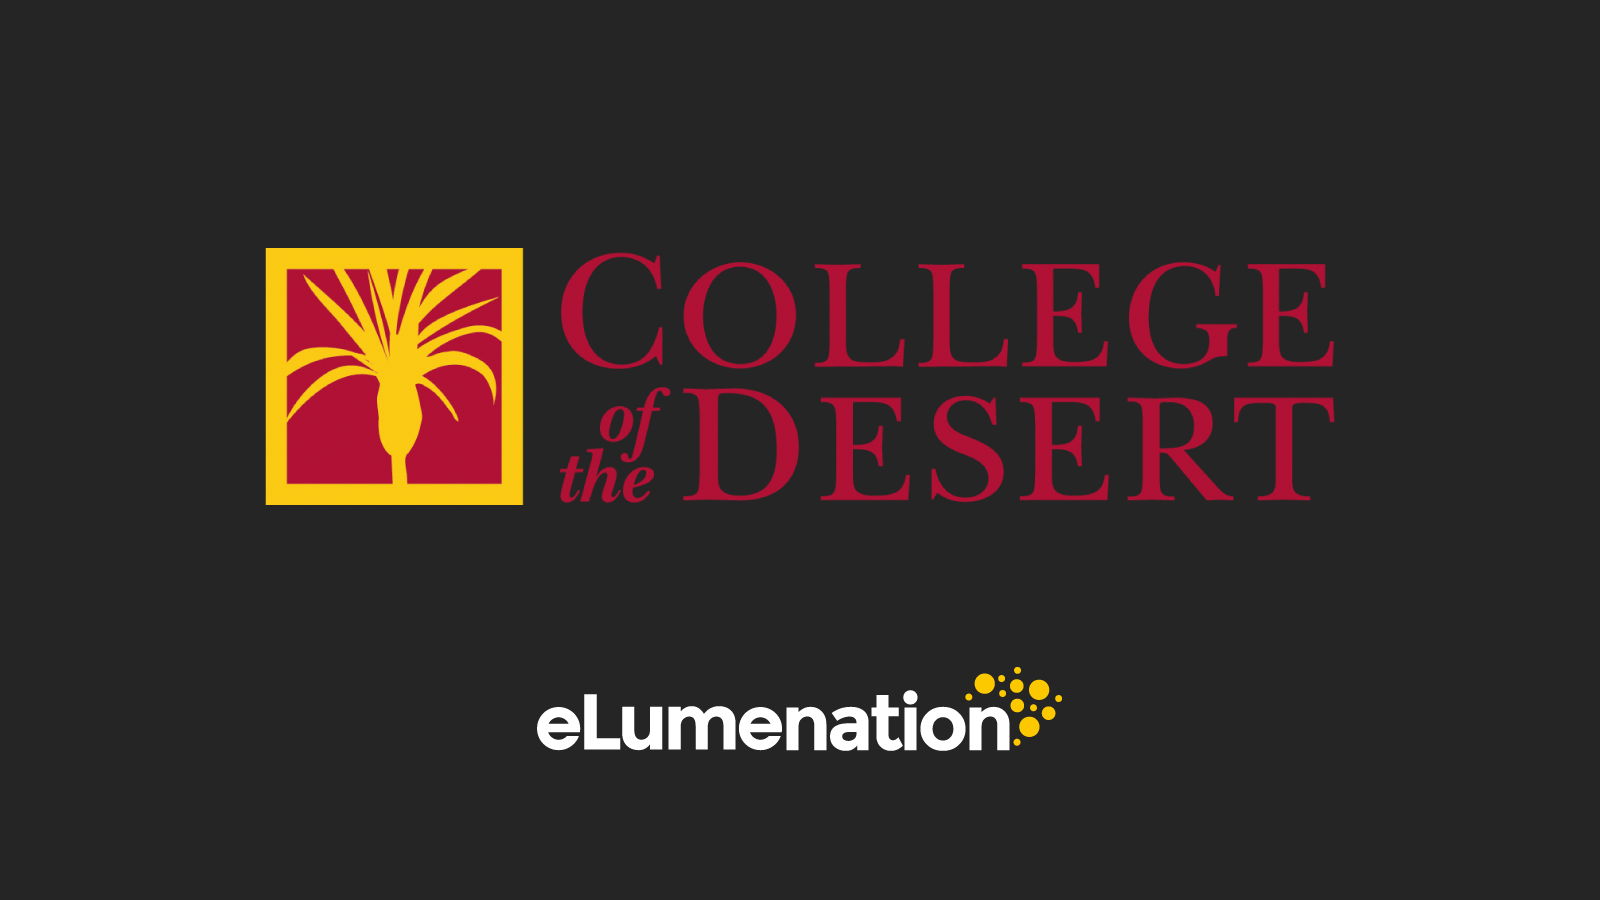 Mapping for Life: College of the Desert at eLumenation